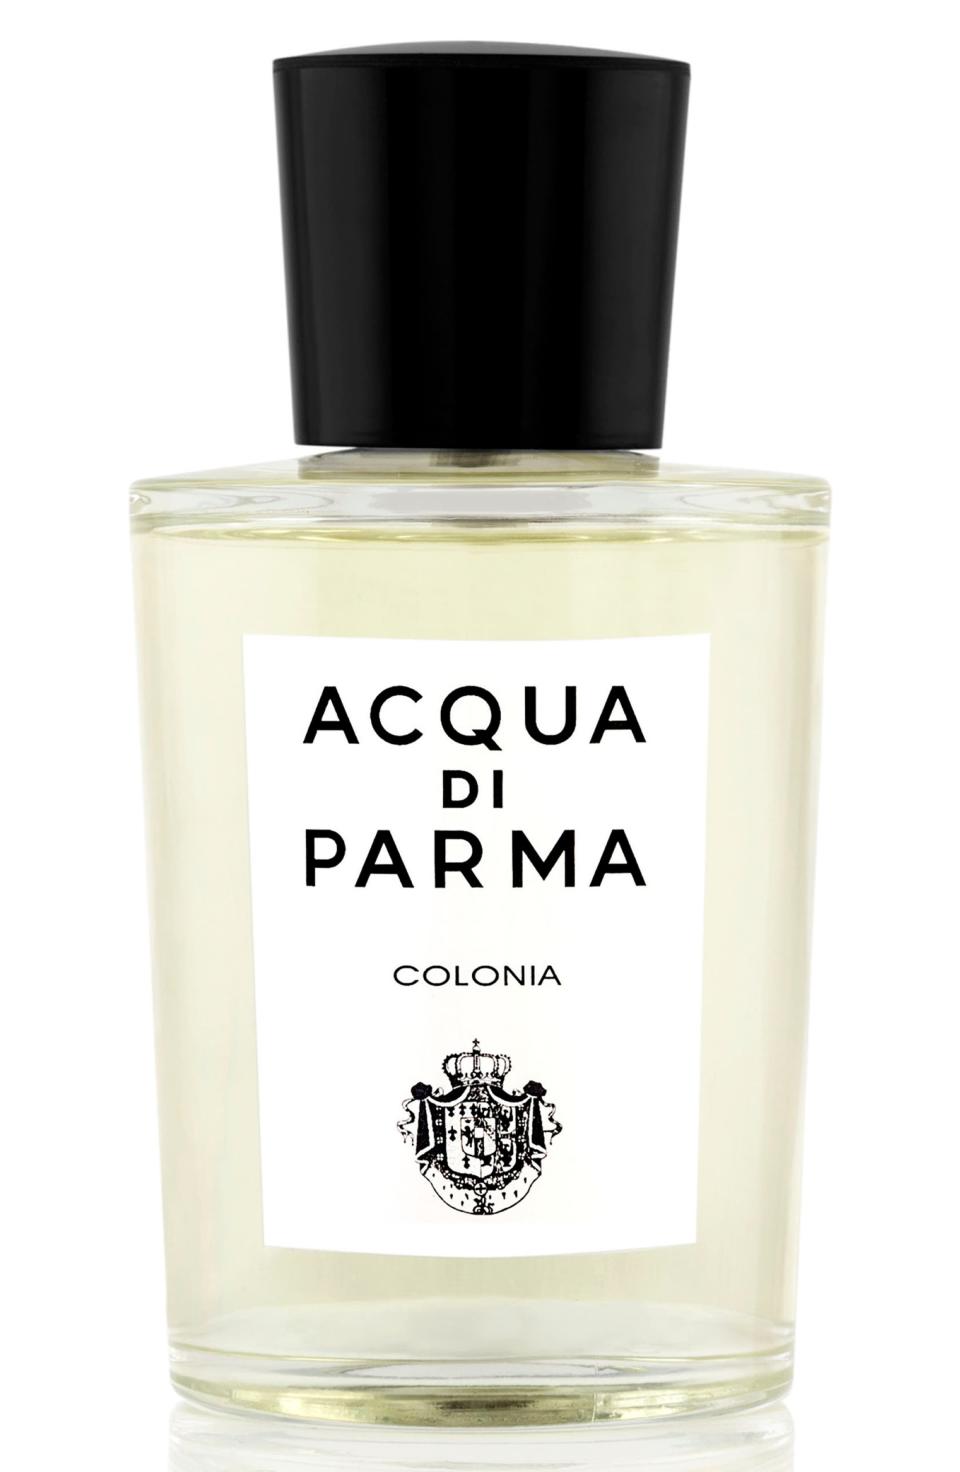 <p><strong>Acqua Di Parma</strong></p><p>nordstrom.com</p><p><strong>$181.00</strong></p><p><a href="https://go.redirectingat.com?id=74968X1596630&url=https%3A%2F%2Fwww.nordstrom.com%2Fs%2Facqua-di-parma-colonia-eau-de-cologne-natural-spray%2F2924887&sref=https%3A%2F%2Fwww.veranda.com%2Fshopping%2Fg29775990%2Fstocking-stuffers-ideas%2F" rel="nofollow noopener" target="_blank" data-ylk="slk:Shop Now" class="link ">Shop Now</a></p><p>This citrusy fragrance is perfect for the traditionalist to wear night or day. A burst of lemon, sweet orange, and Calabrian bergamot make this cologne wearable year-round, while a base of sandalwood and patchouli offer a masculine balance of fragrance. </p>